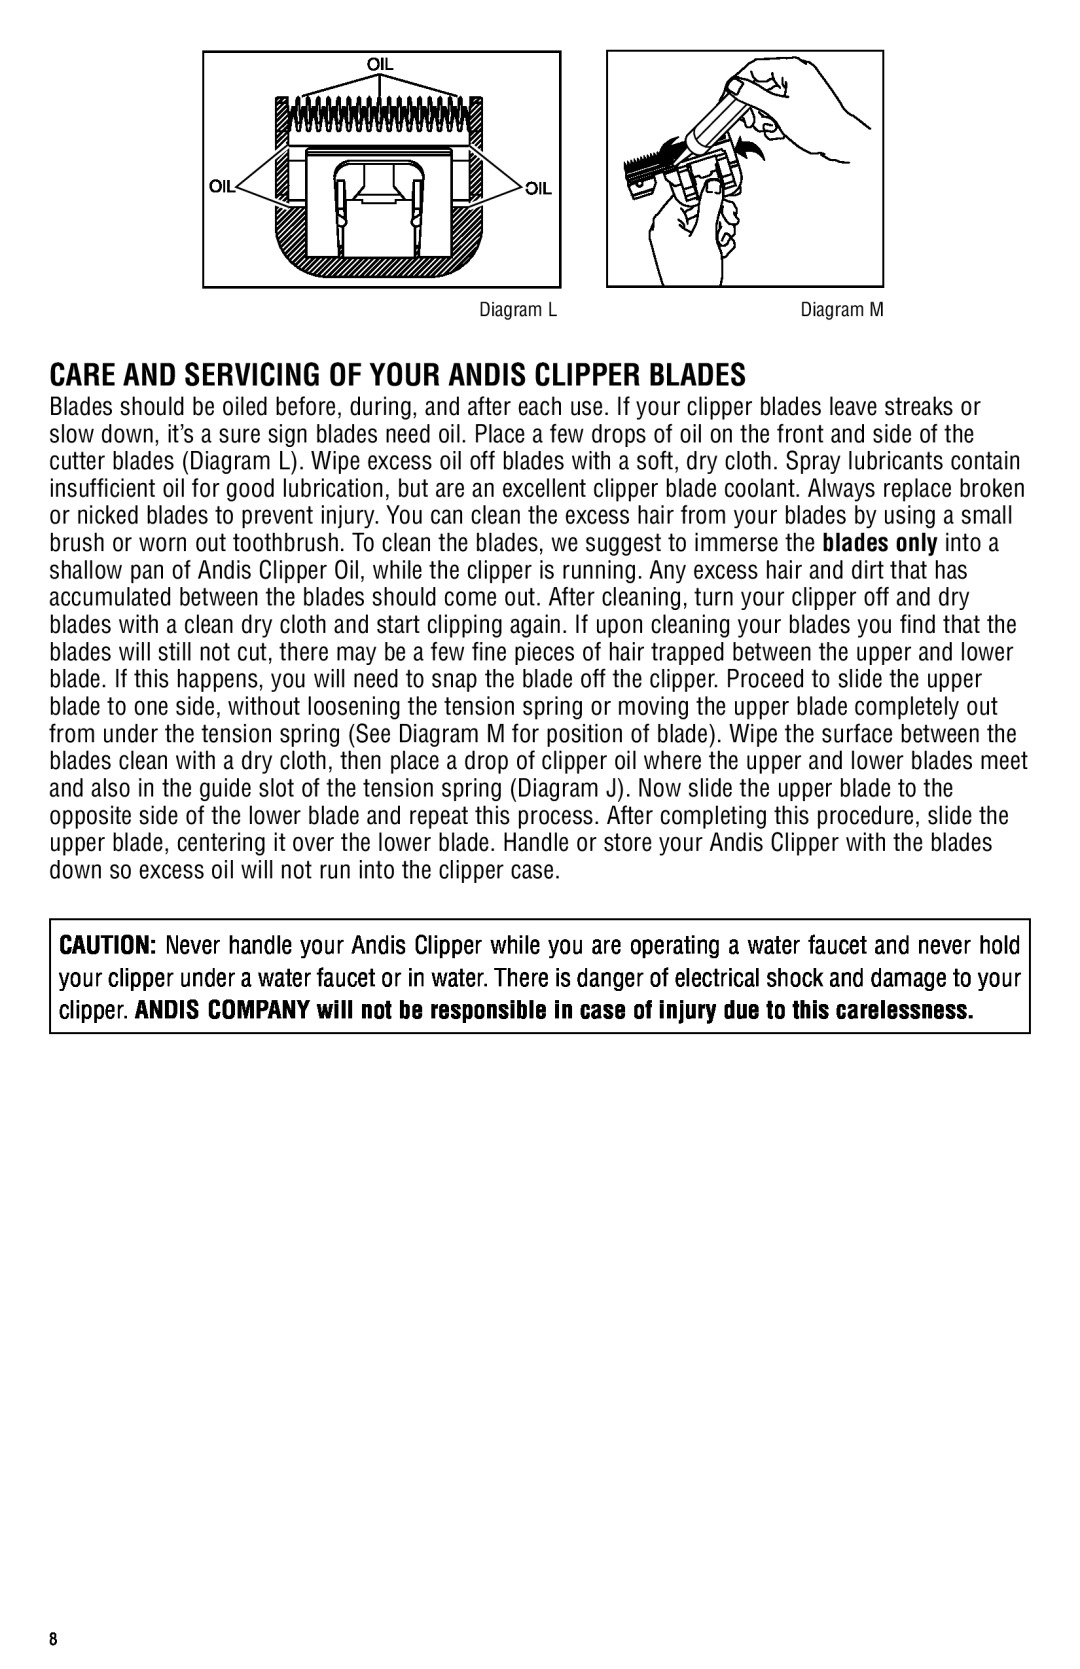 Andis Company AGRC manual care and servicing of your andis Clipper blades, Diagram L 